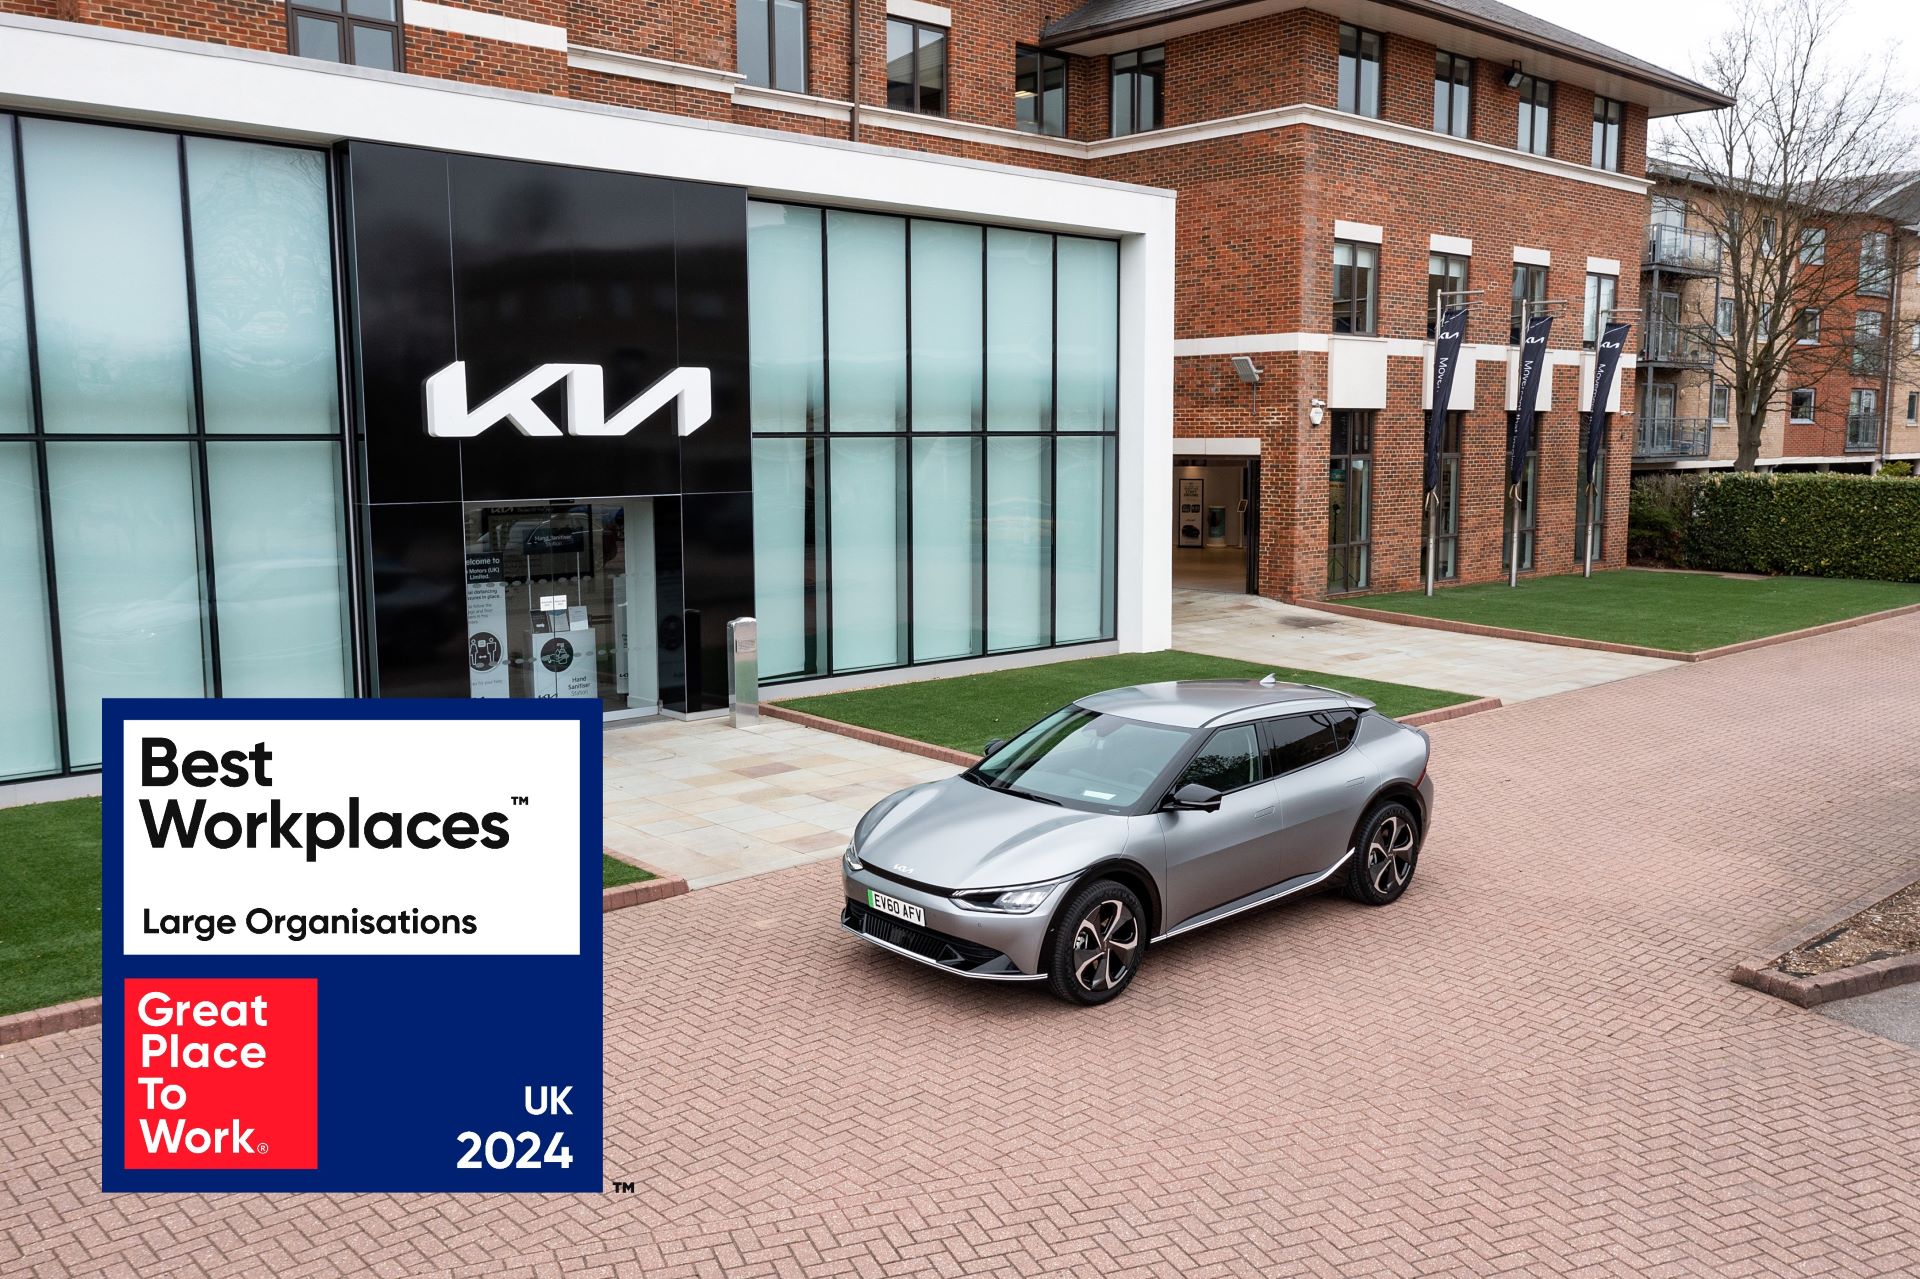 UK’s Best Workplaces™ recognition awarded to Kia UK